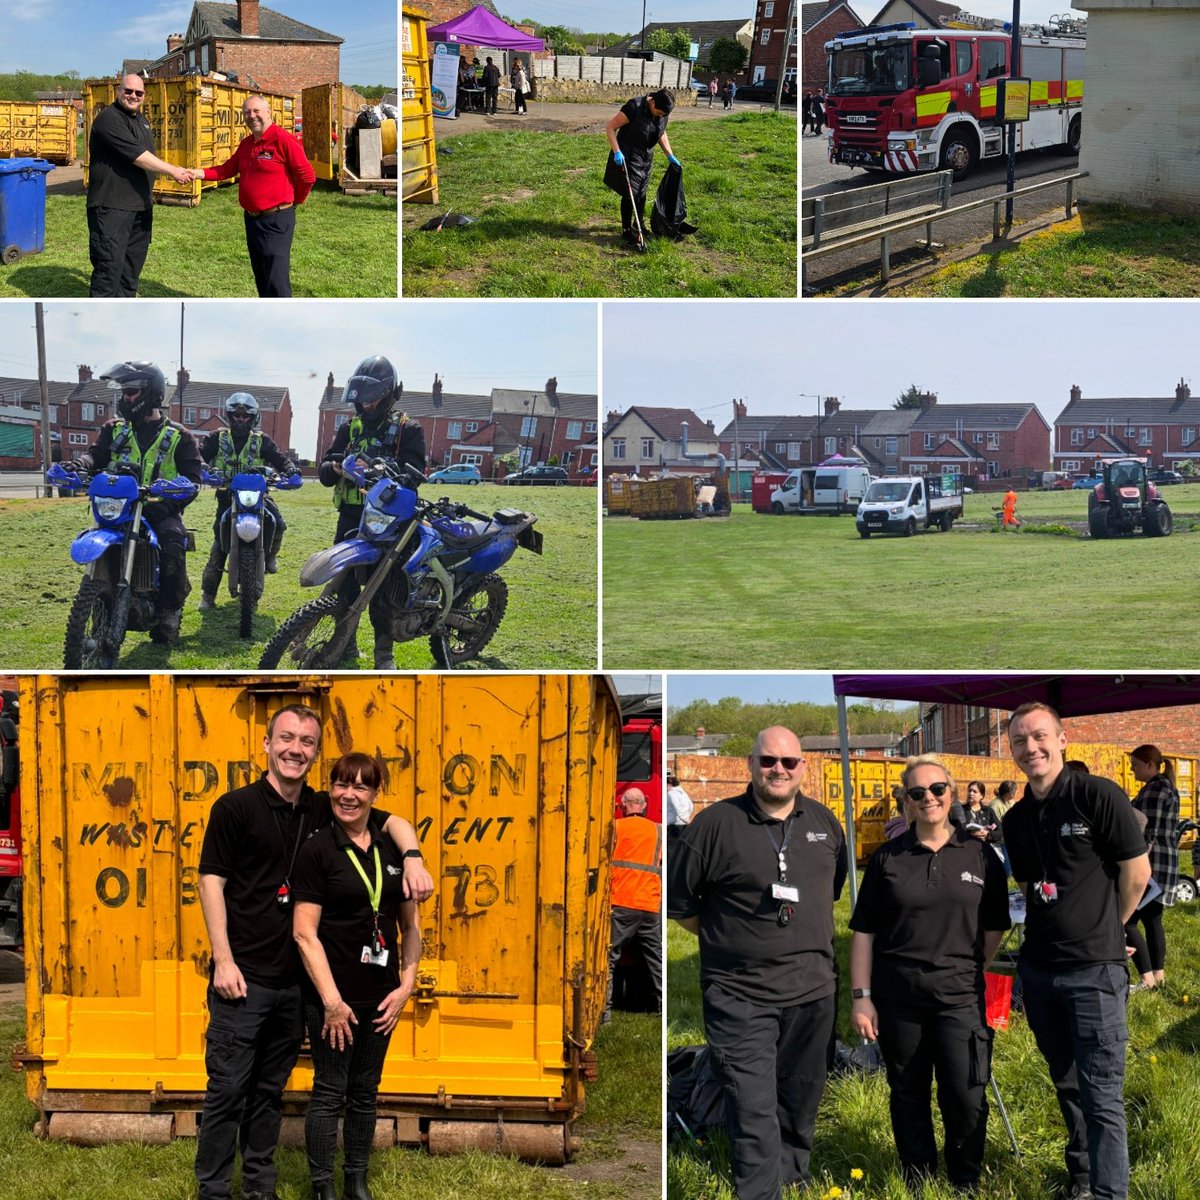 (1/3)What a fantastic day today in Highfields! A great display of effort from local residents, colleagues and partners for the Community Clean-up day! The sun was shining, litter was picked, waste was removed, grass was cut and the village looked all the better for it.